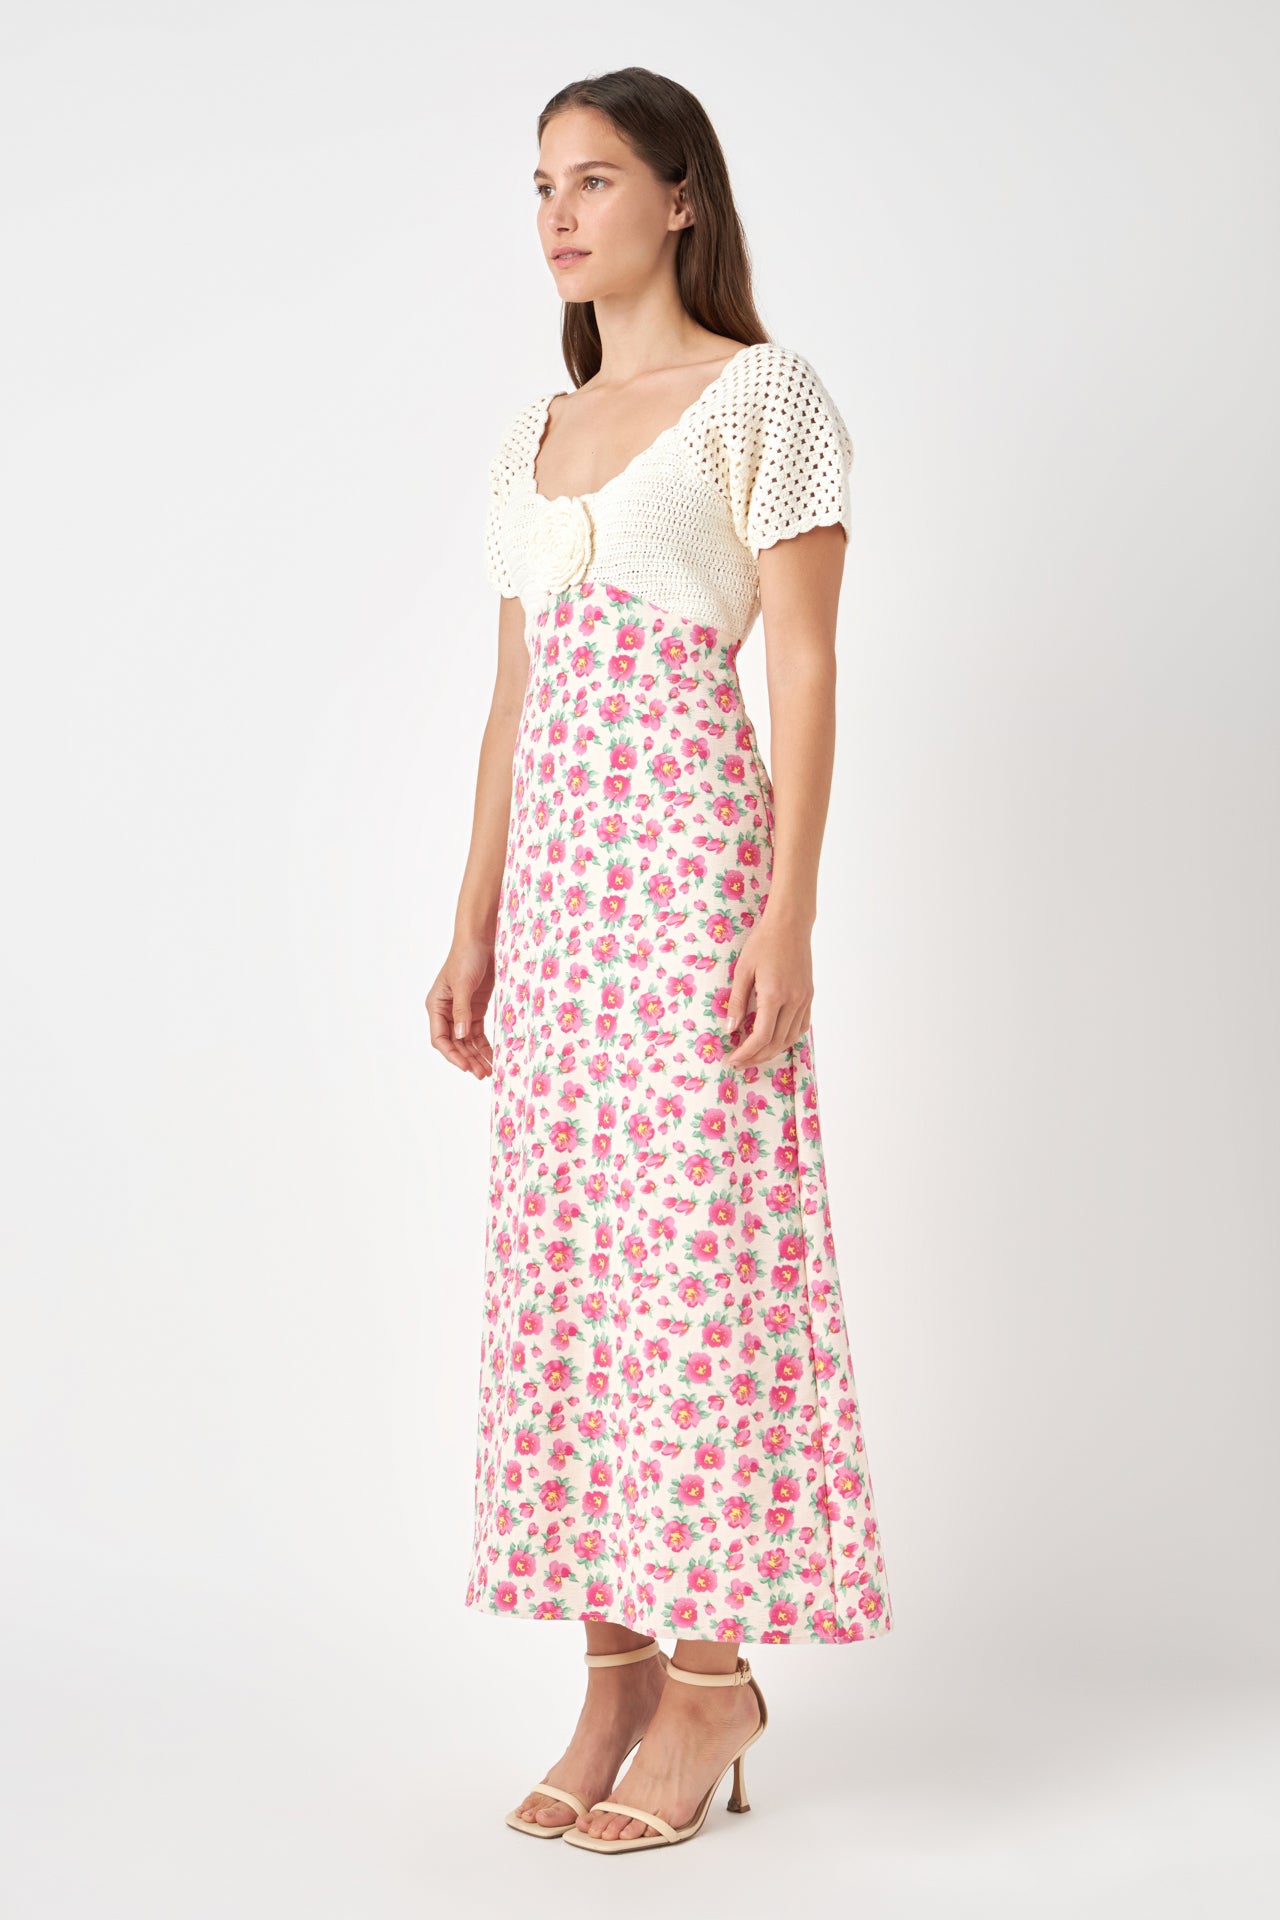 ENGLISH FACTORY - Crochet Floral Maxi Dress - DRESSES available at Objectrare